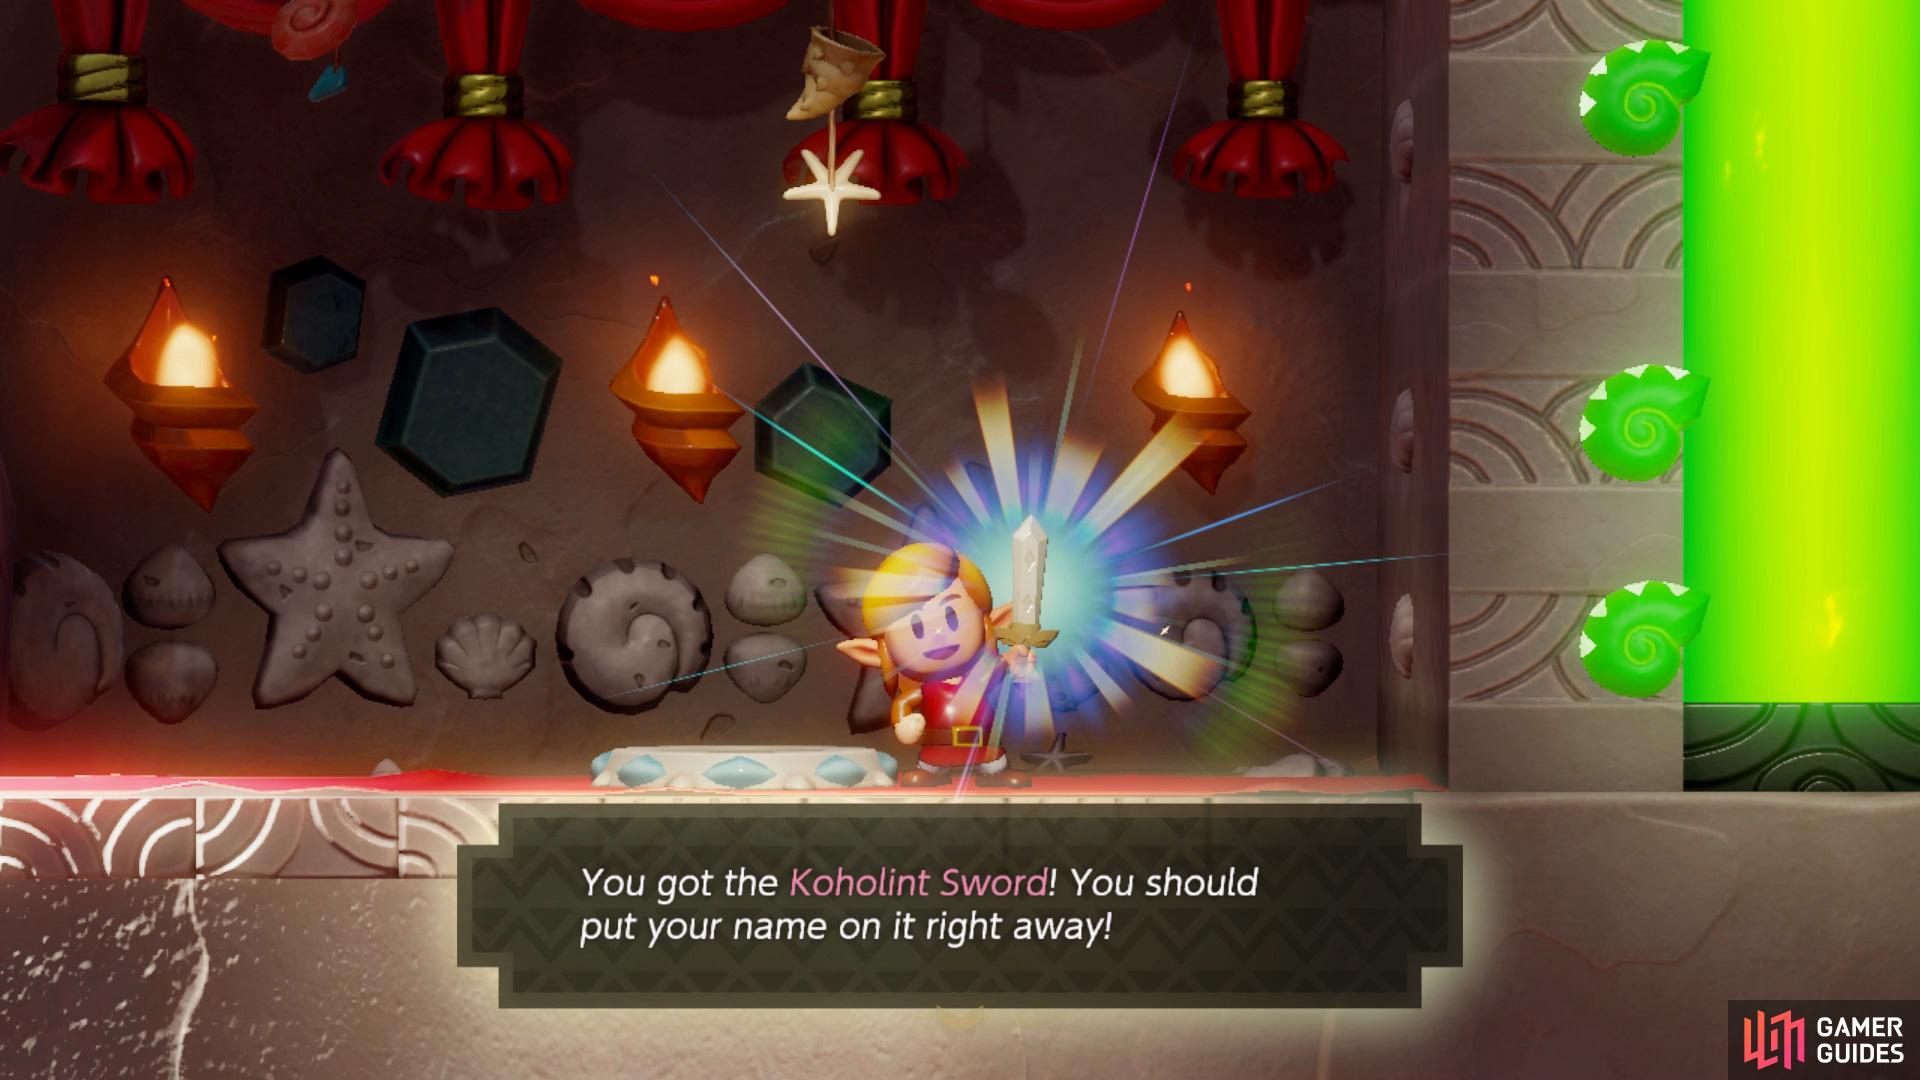 Update your amount of Secret Seashells found in the Seashell Mansion and youll rewarded with Koholint Sword for reaching the fourth milestone